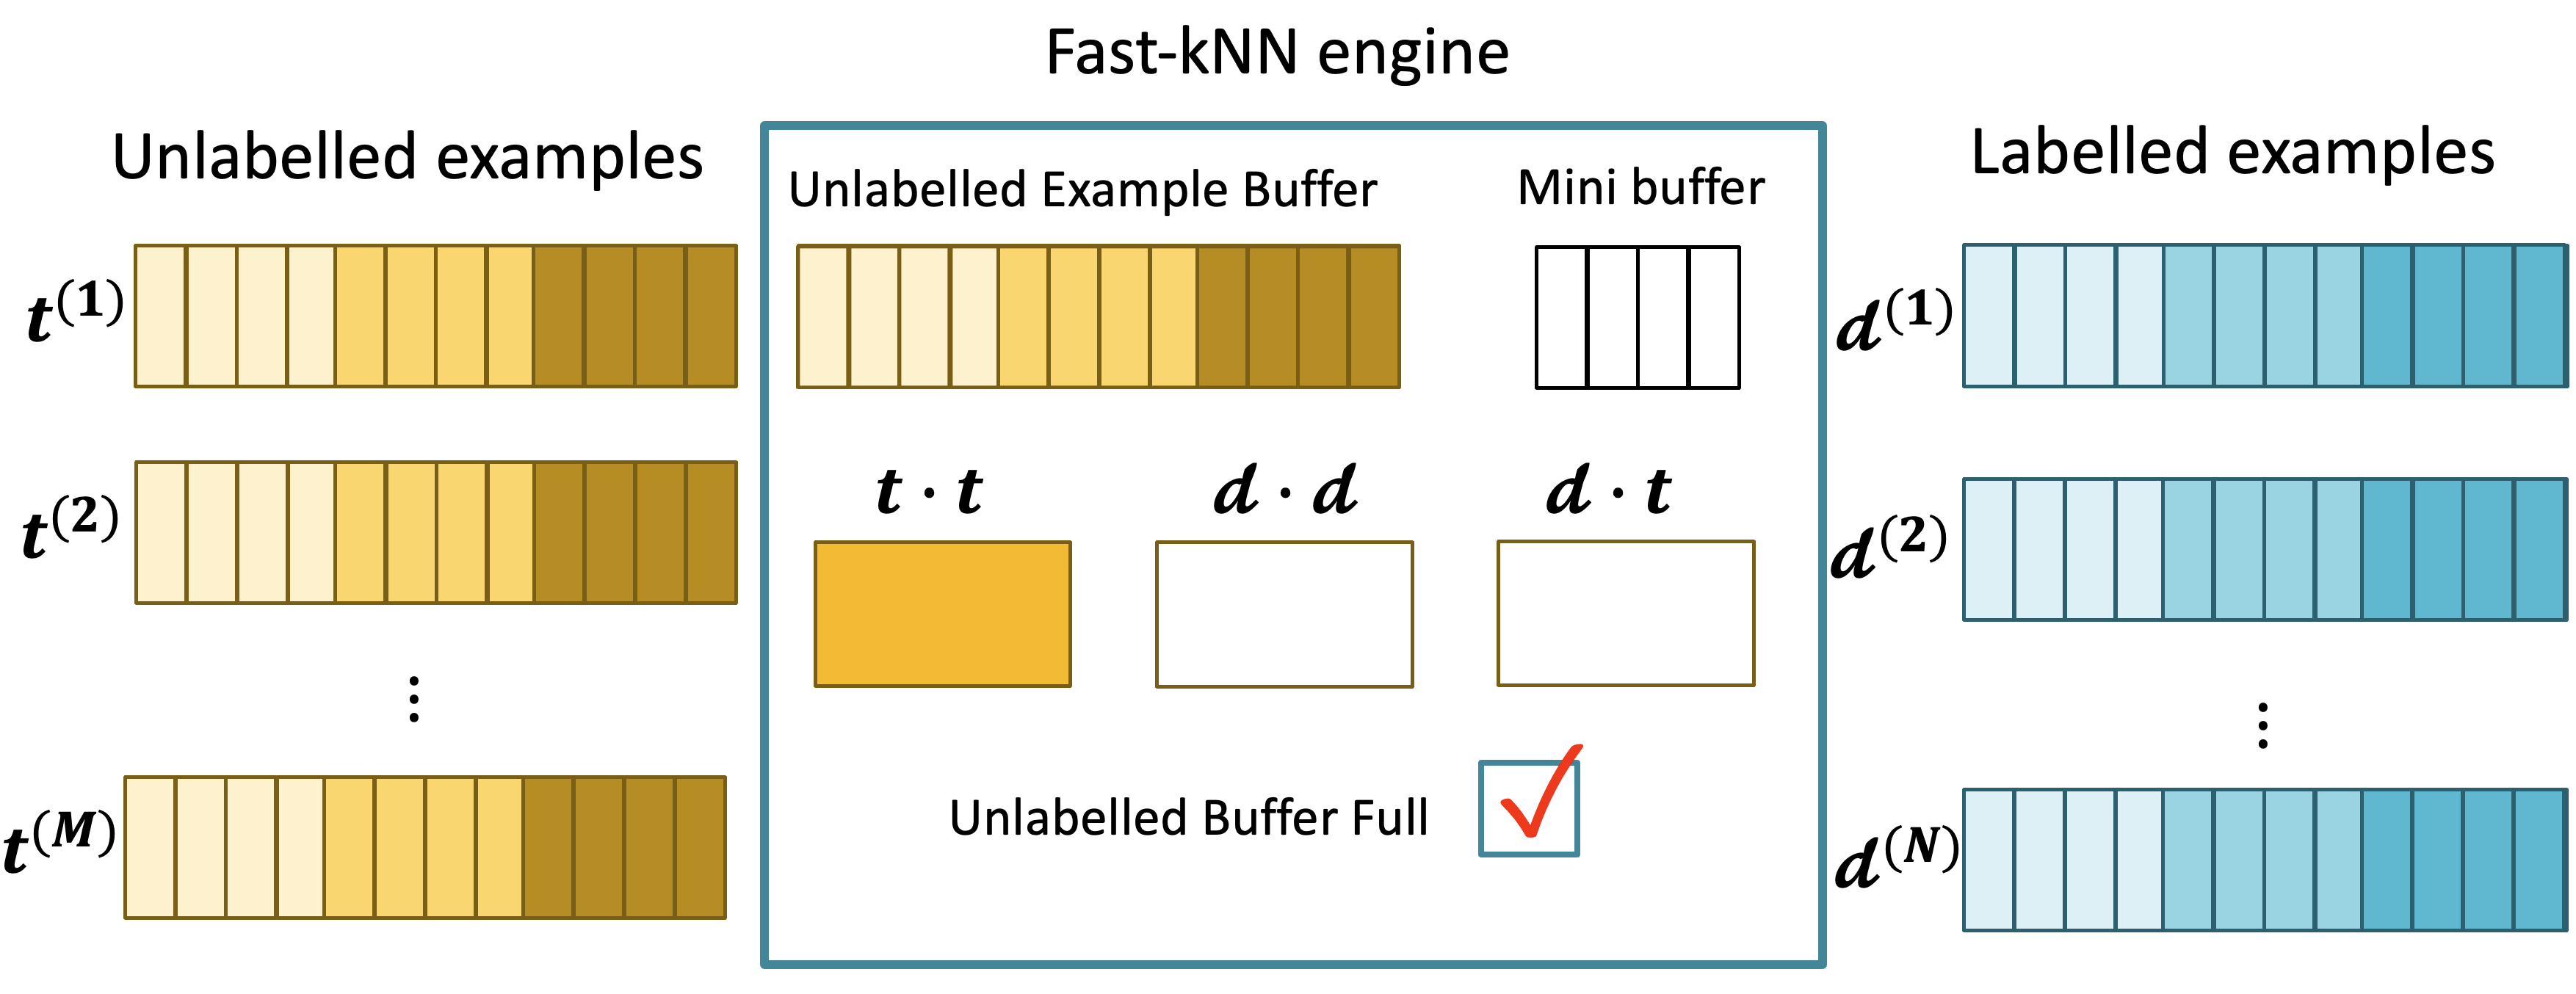 Fast-kNN Engine Overview